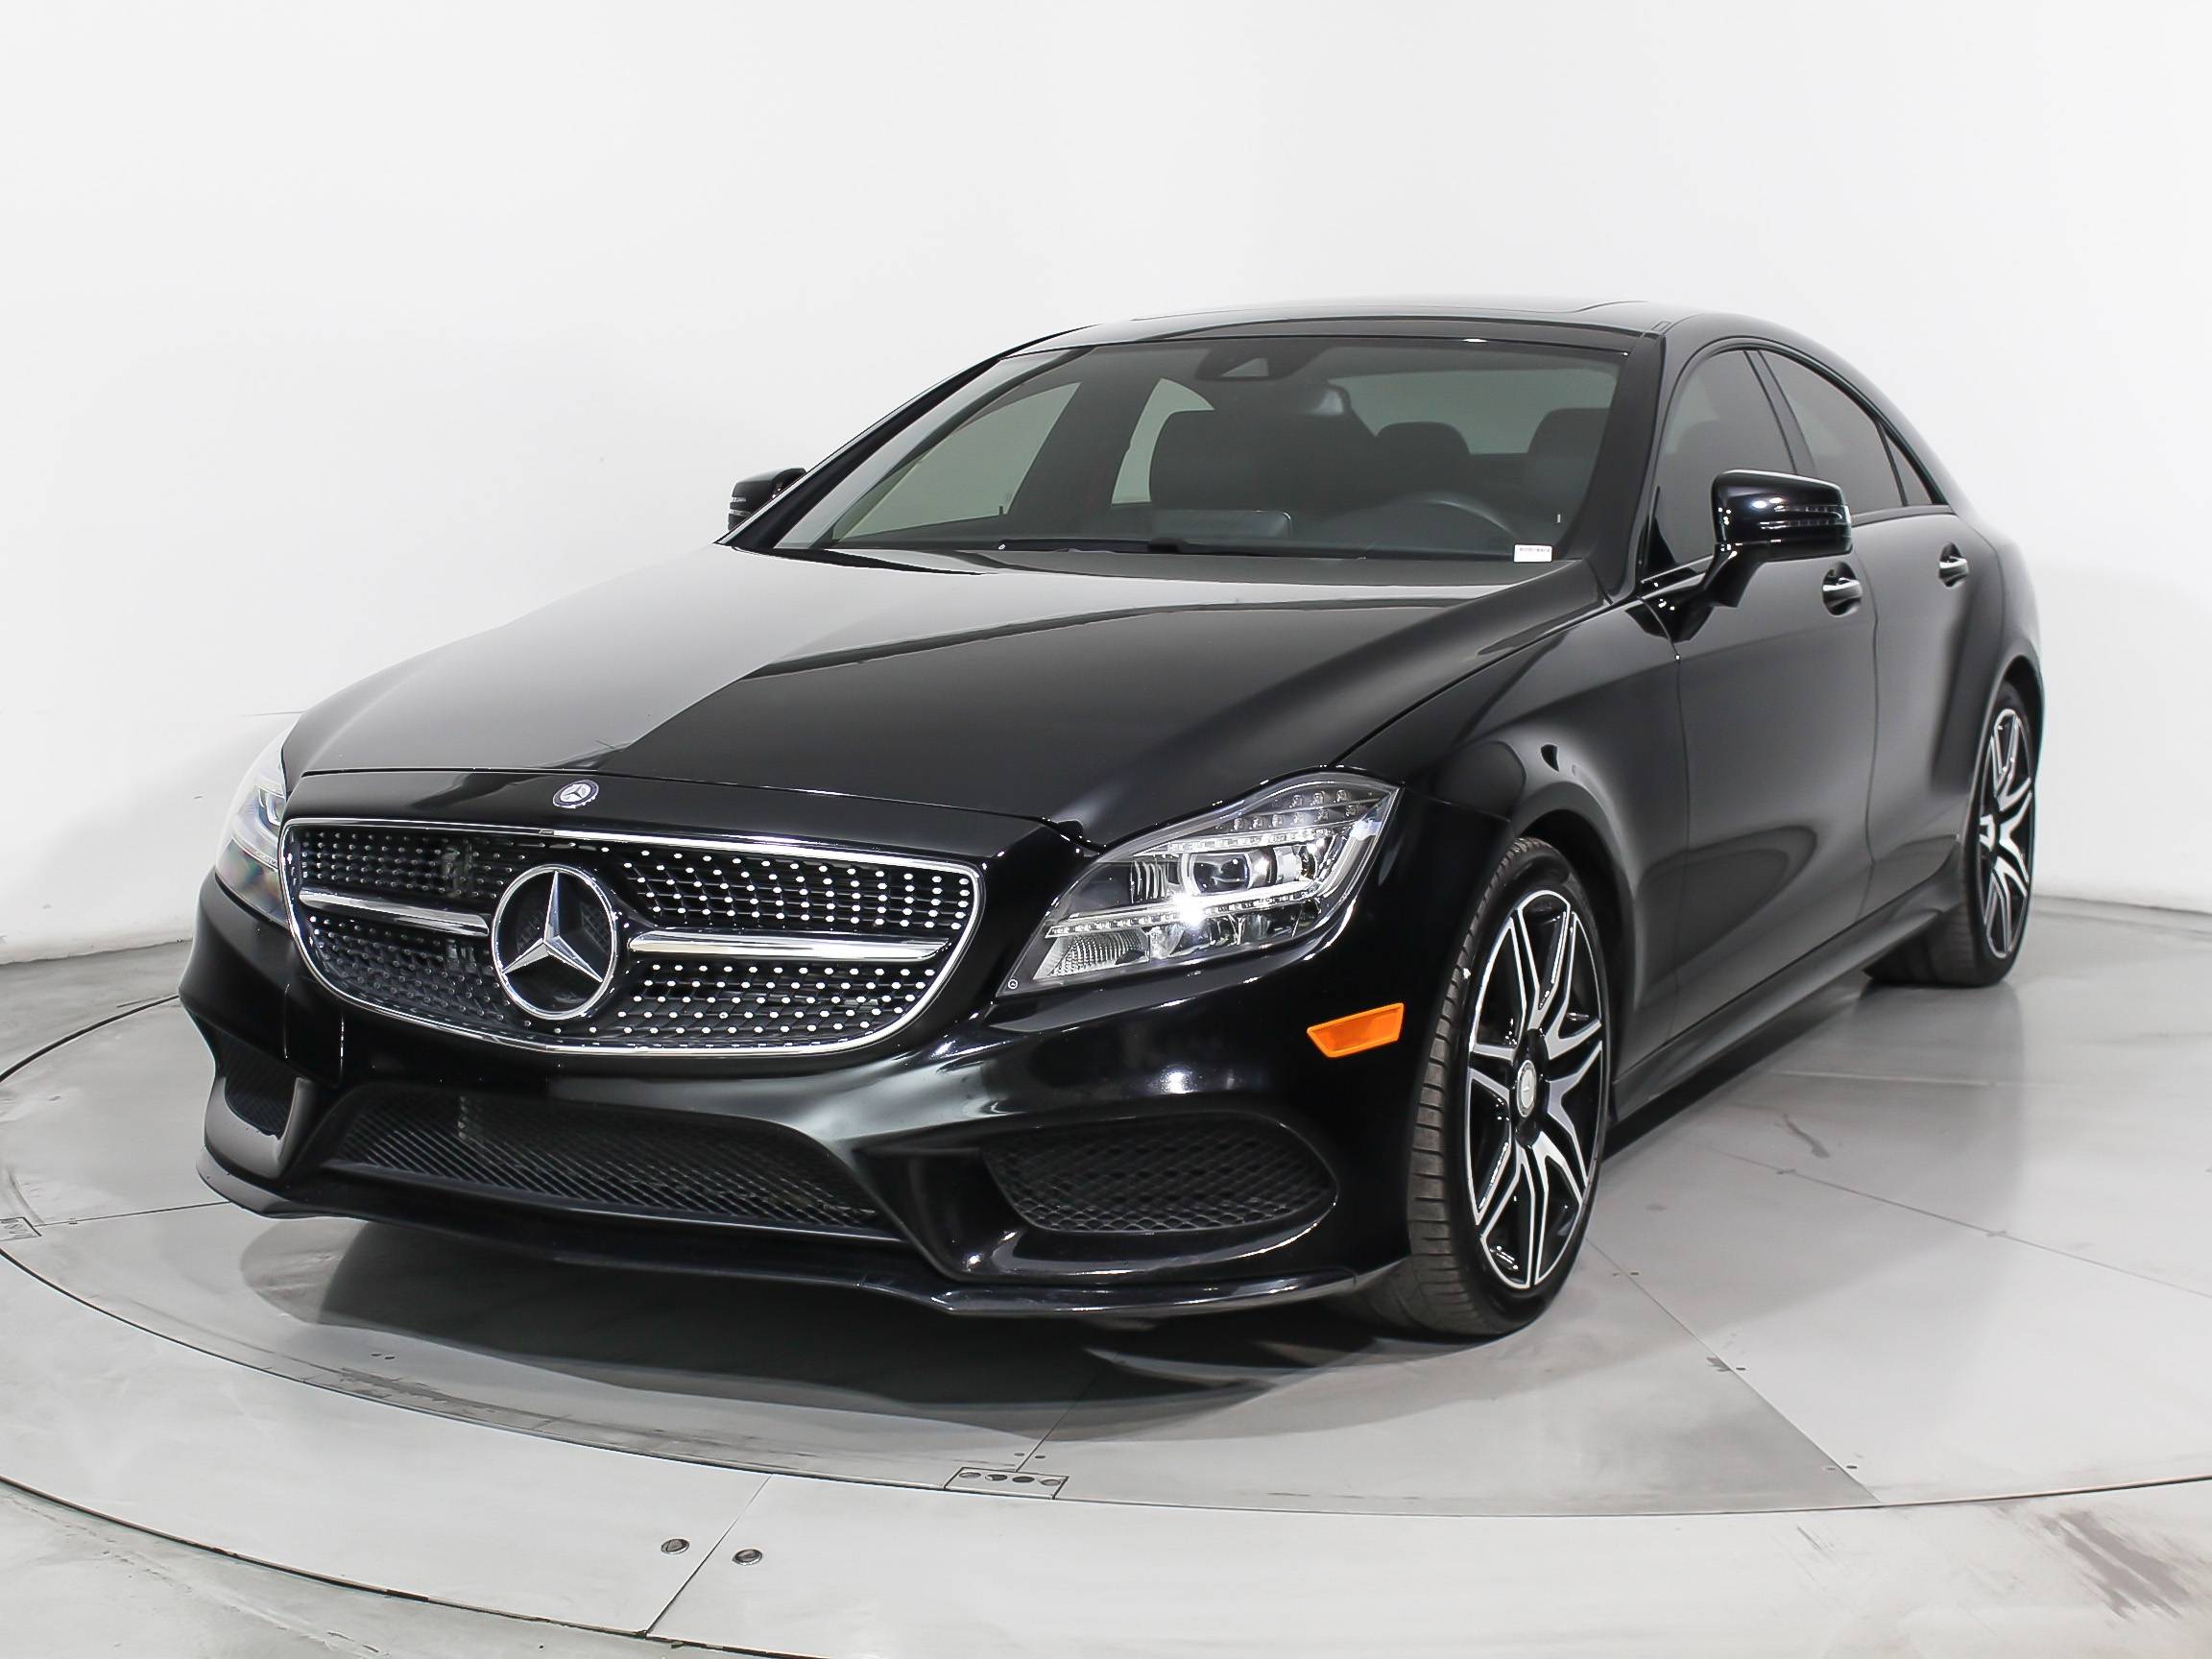 Florida Fine Cars - Used MERCEDES-BENZ CLS CLASS 2016 MIAMI CLS400